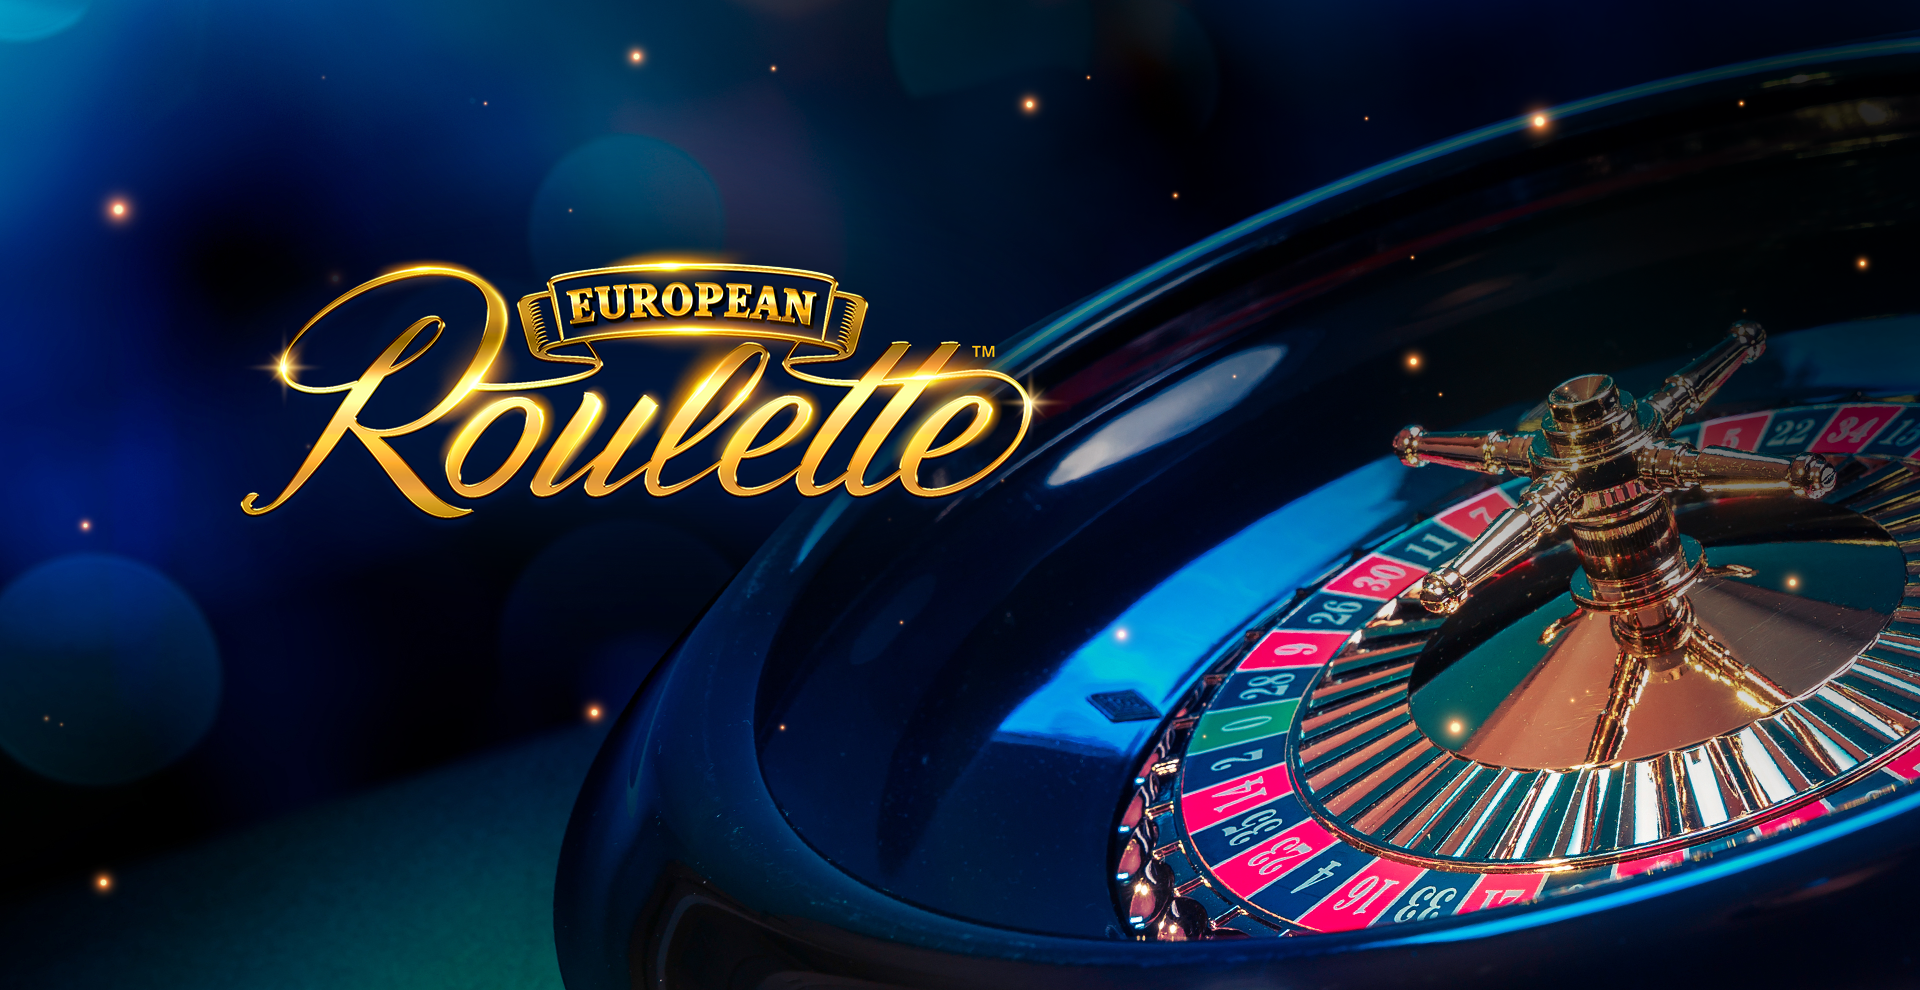 European Roulette is a Slots Game Provided by the Vendor Partner Skywind Group - GamingSoft